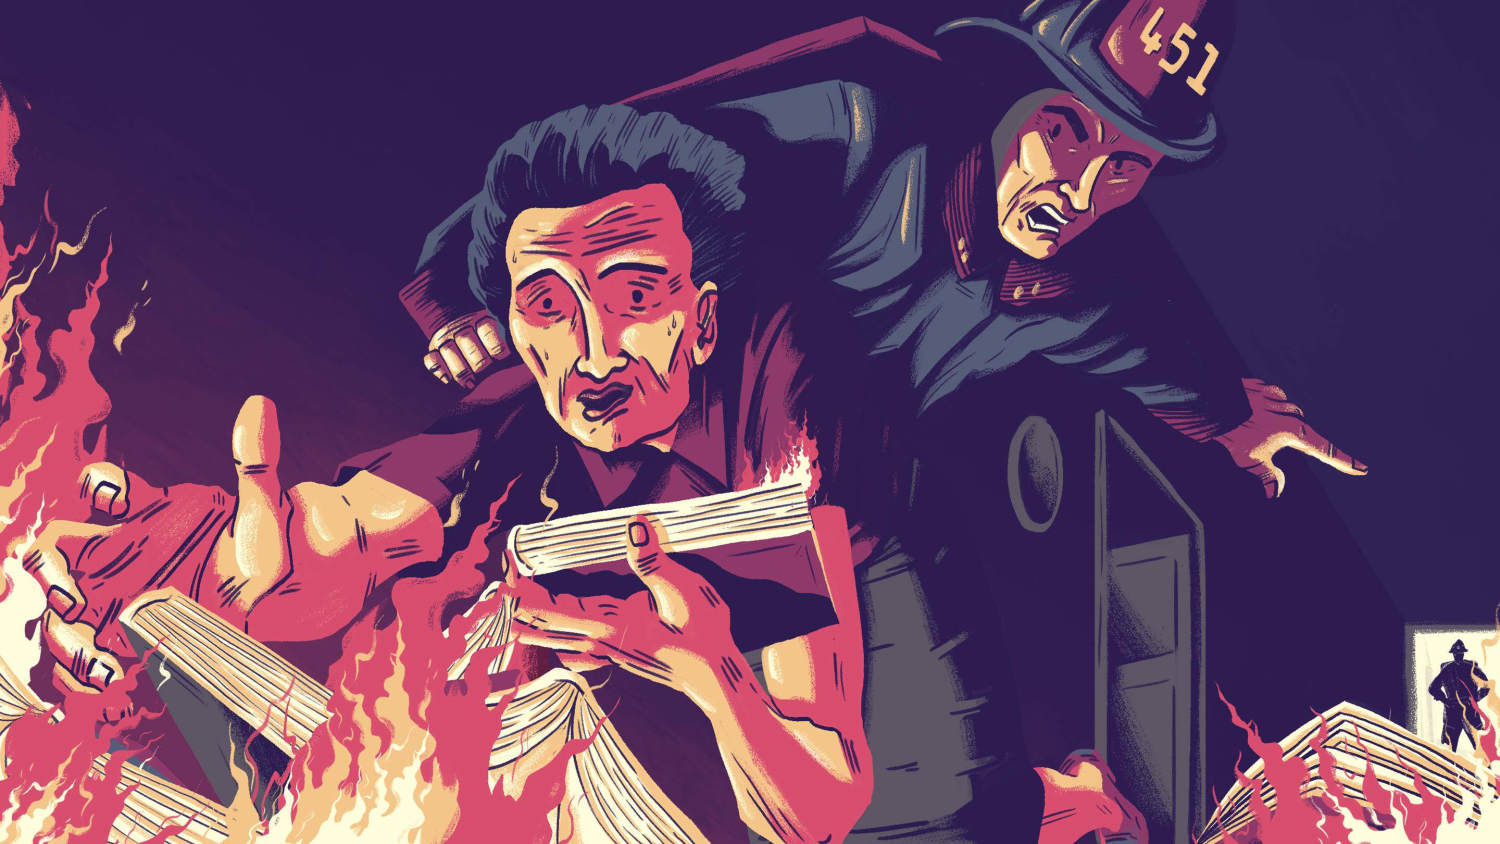 Fahrenheit 451' and Its Blistering Legacy, From Playboy to Beyond